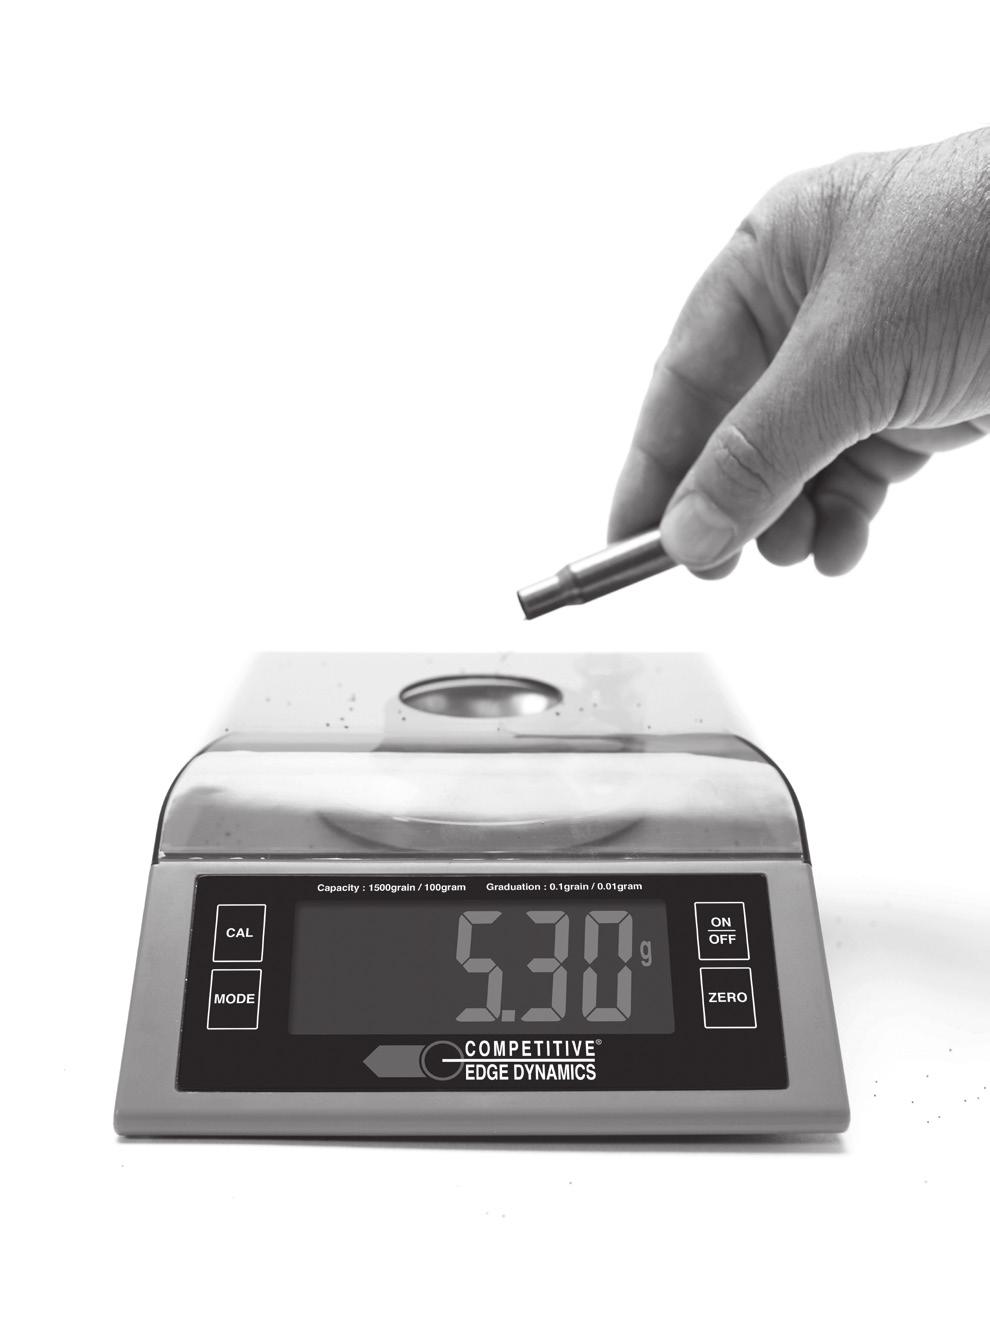 C. About The Scale: 1. Select a FLAT and LEVEL surface, which is not subject to vibration or air movement. 2. Turn the scale on by pressing the ON/ OFF key once. FIG 4 The scale is now on.